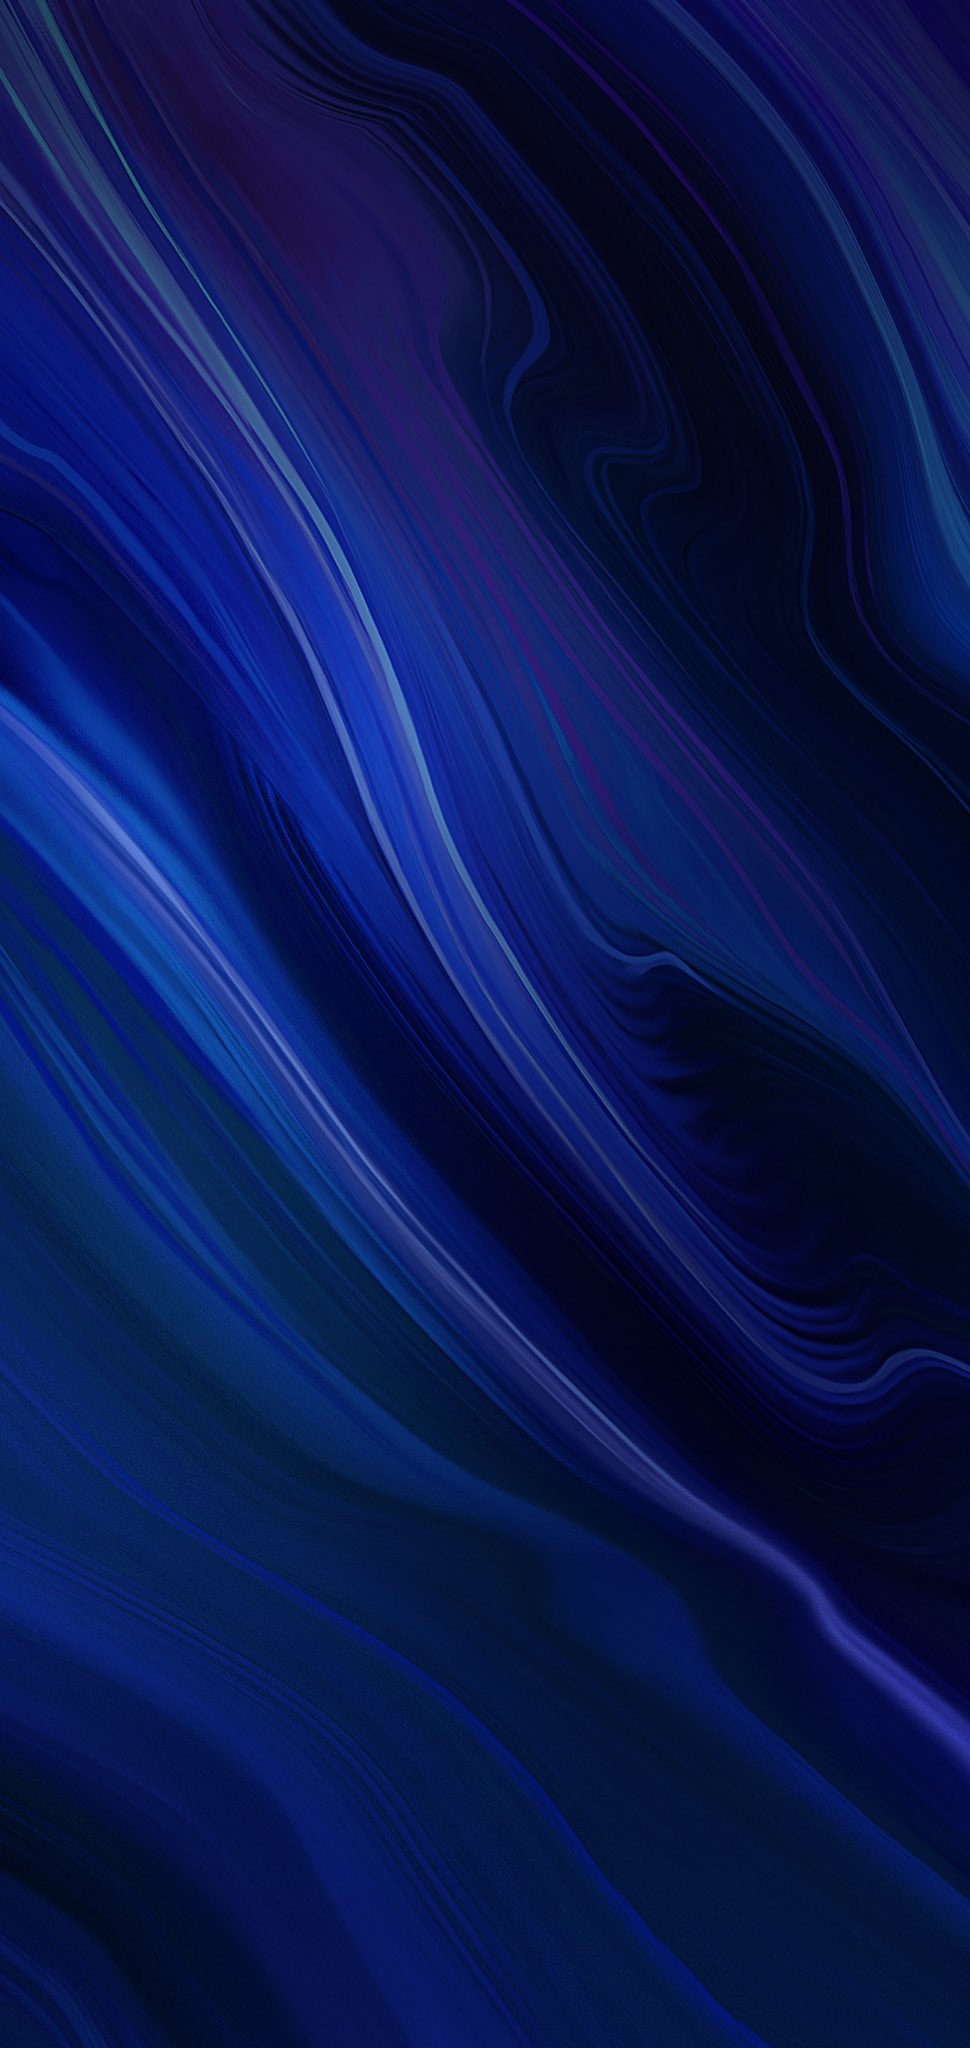 Blue wallpaper for iPhone iPhone 12 Pro, iPad